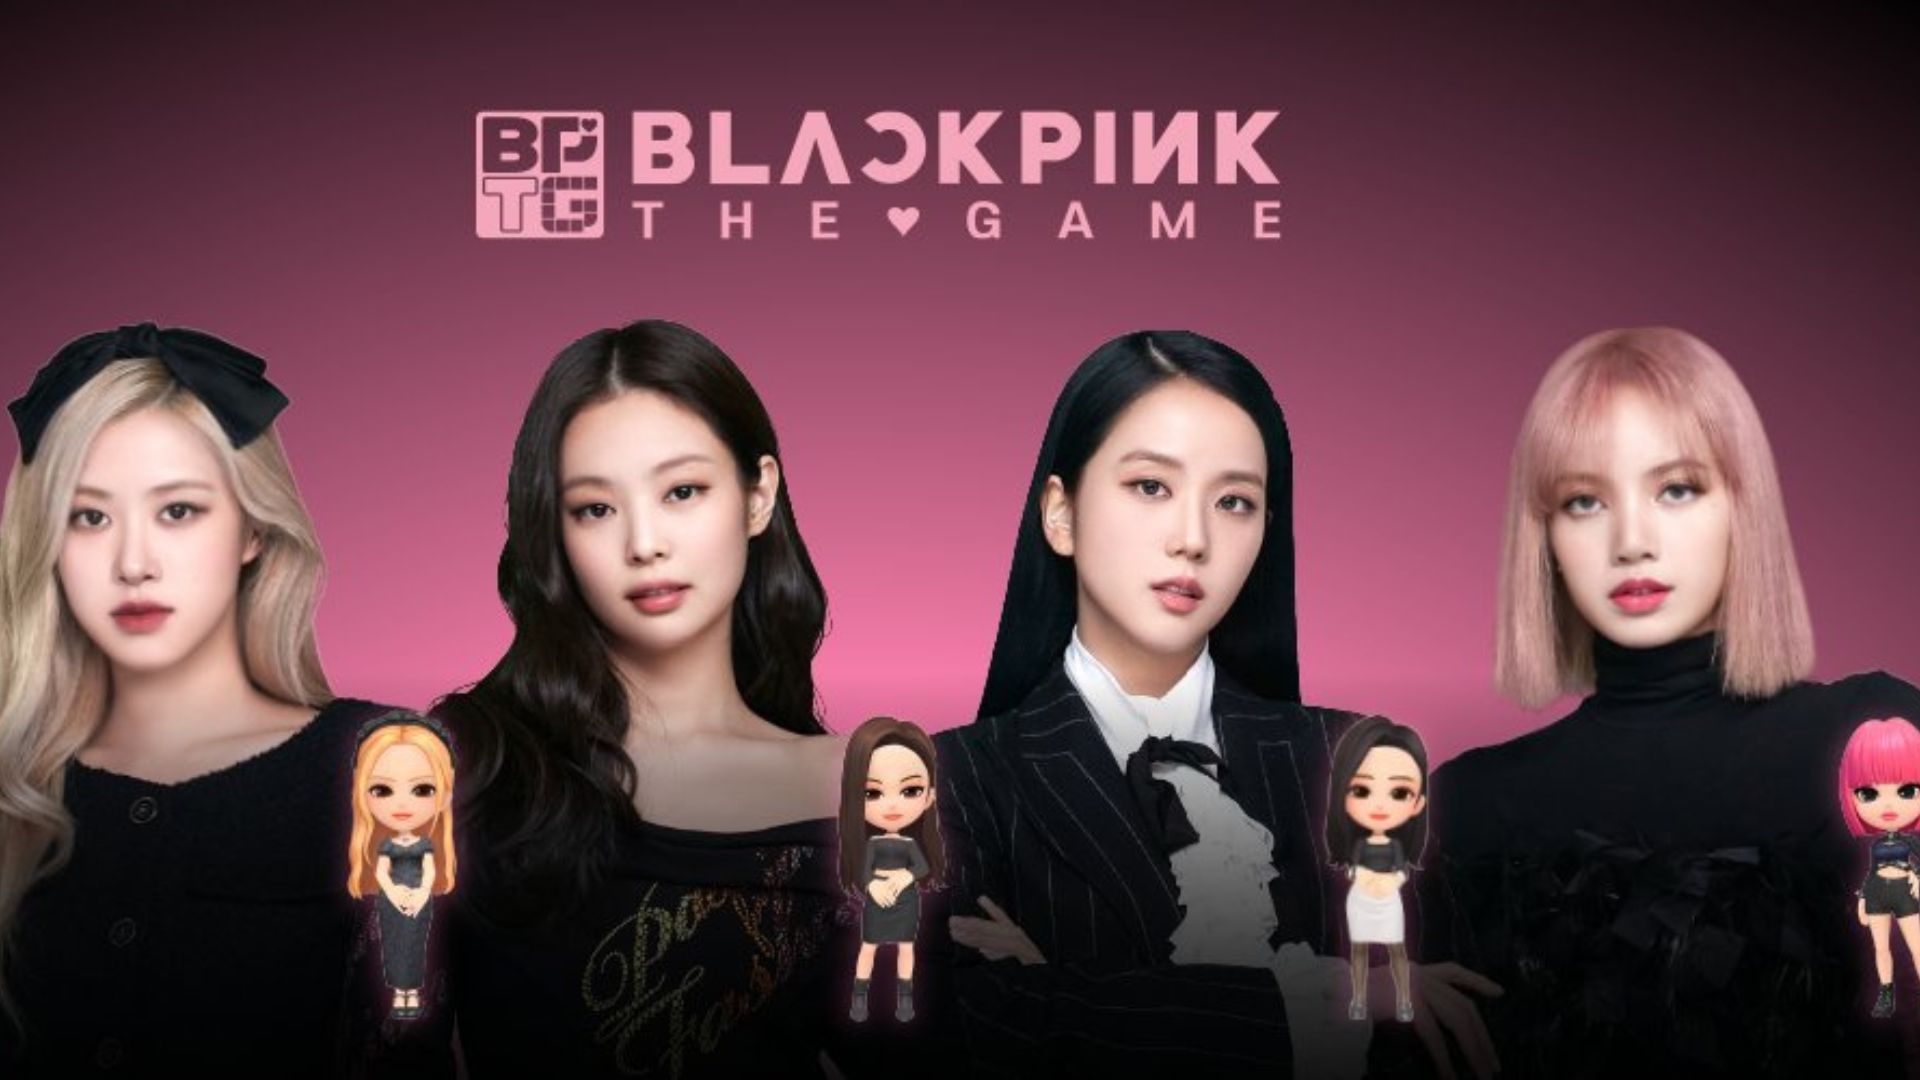 Blackpink to drop music video for song for band's video game